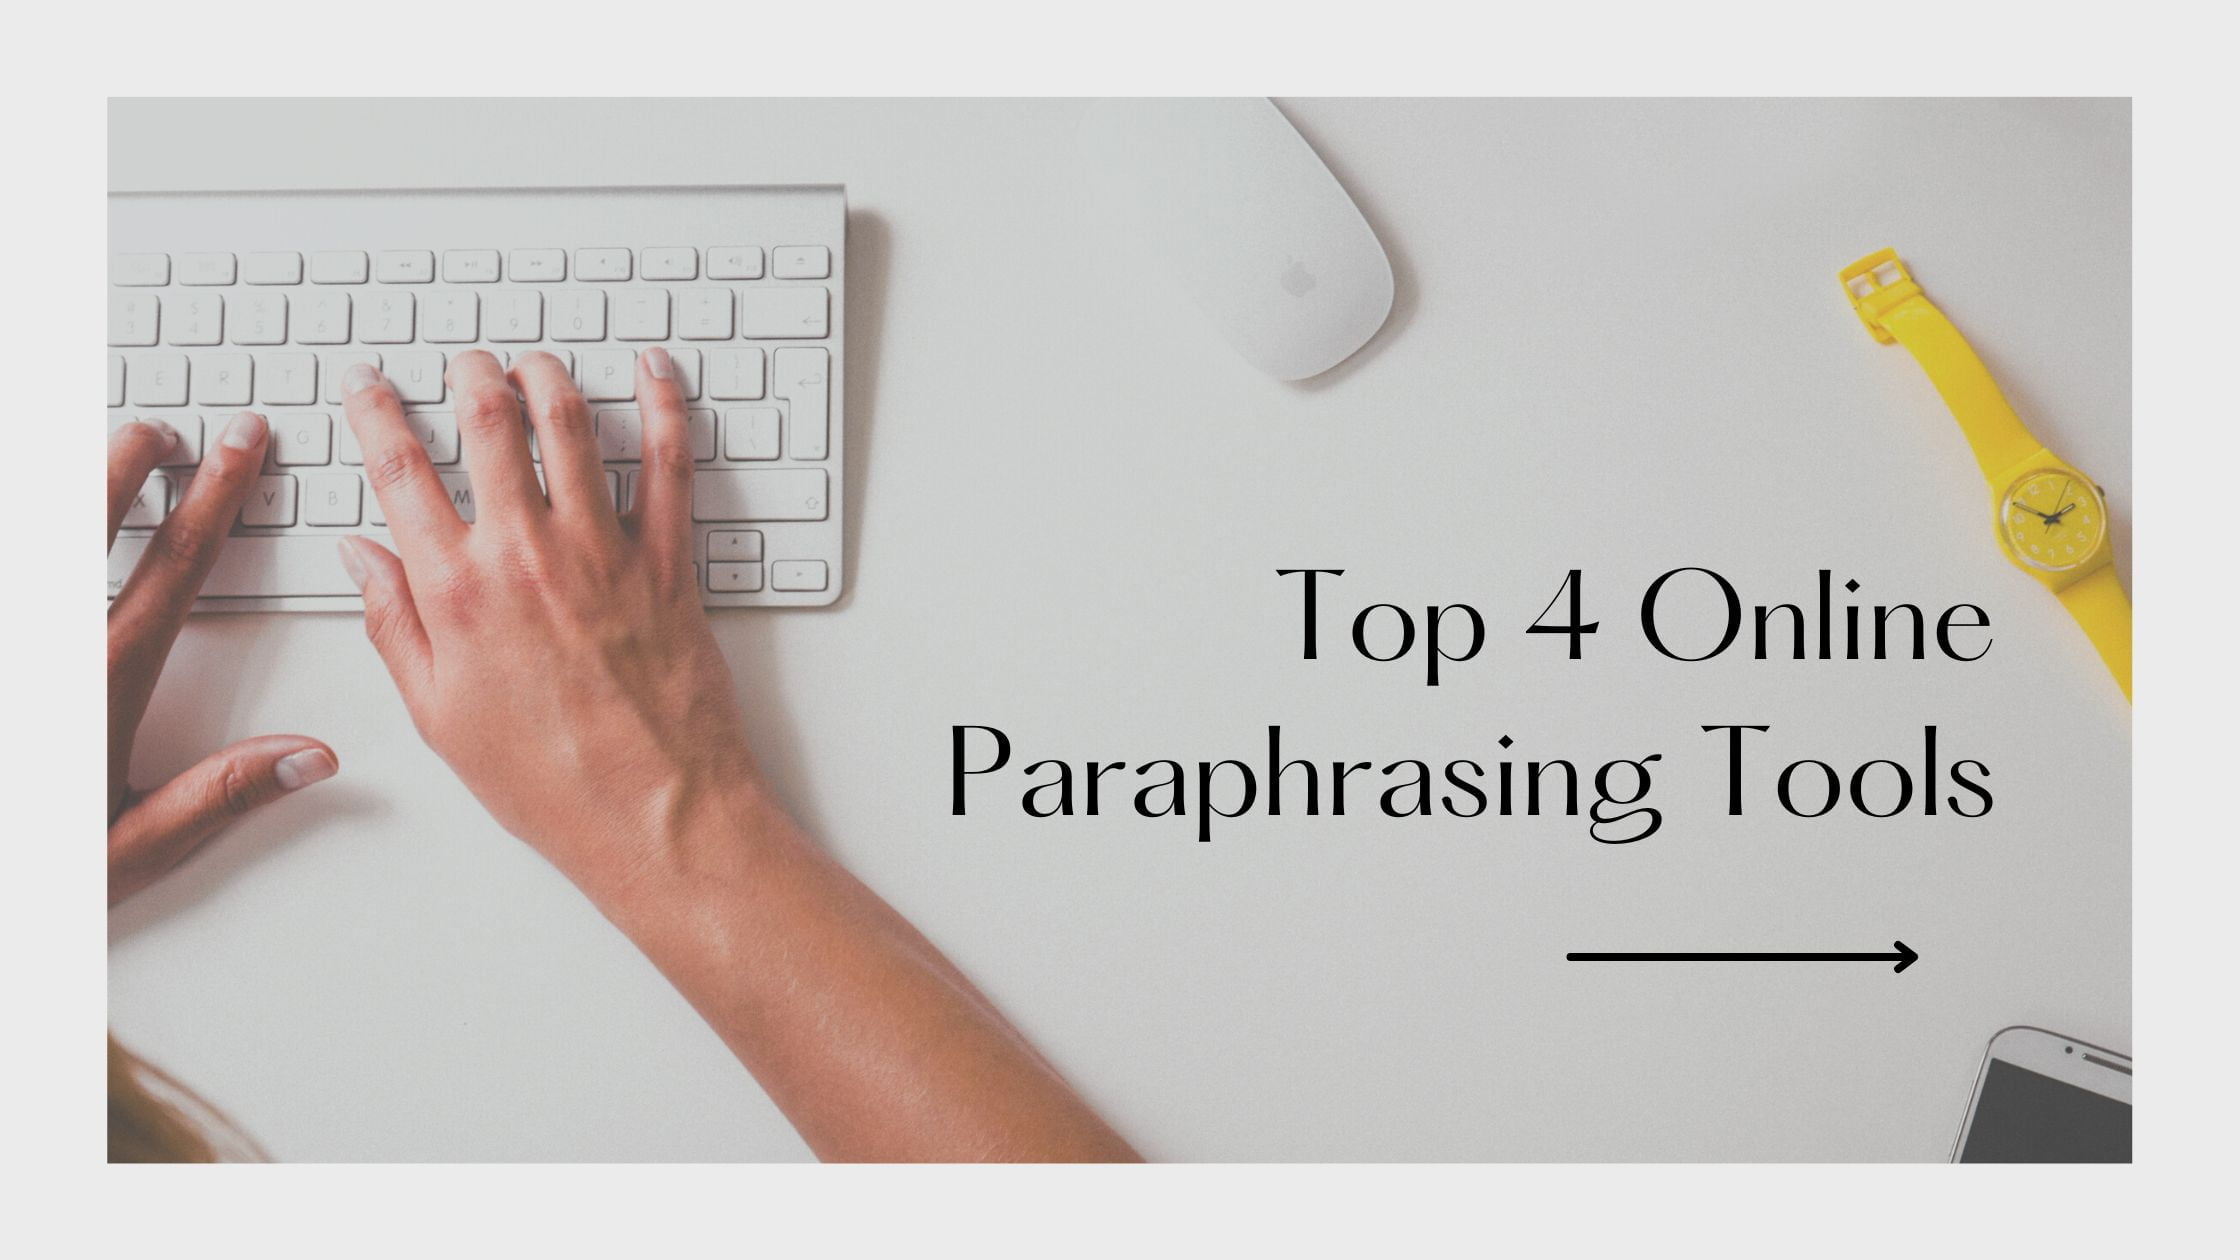 Top 4 Online Paraphrasing Tools for Bloggers in 2022